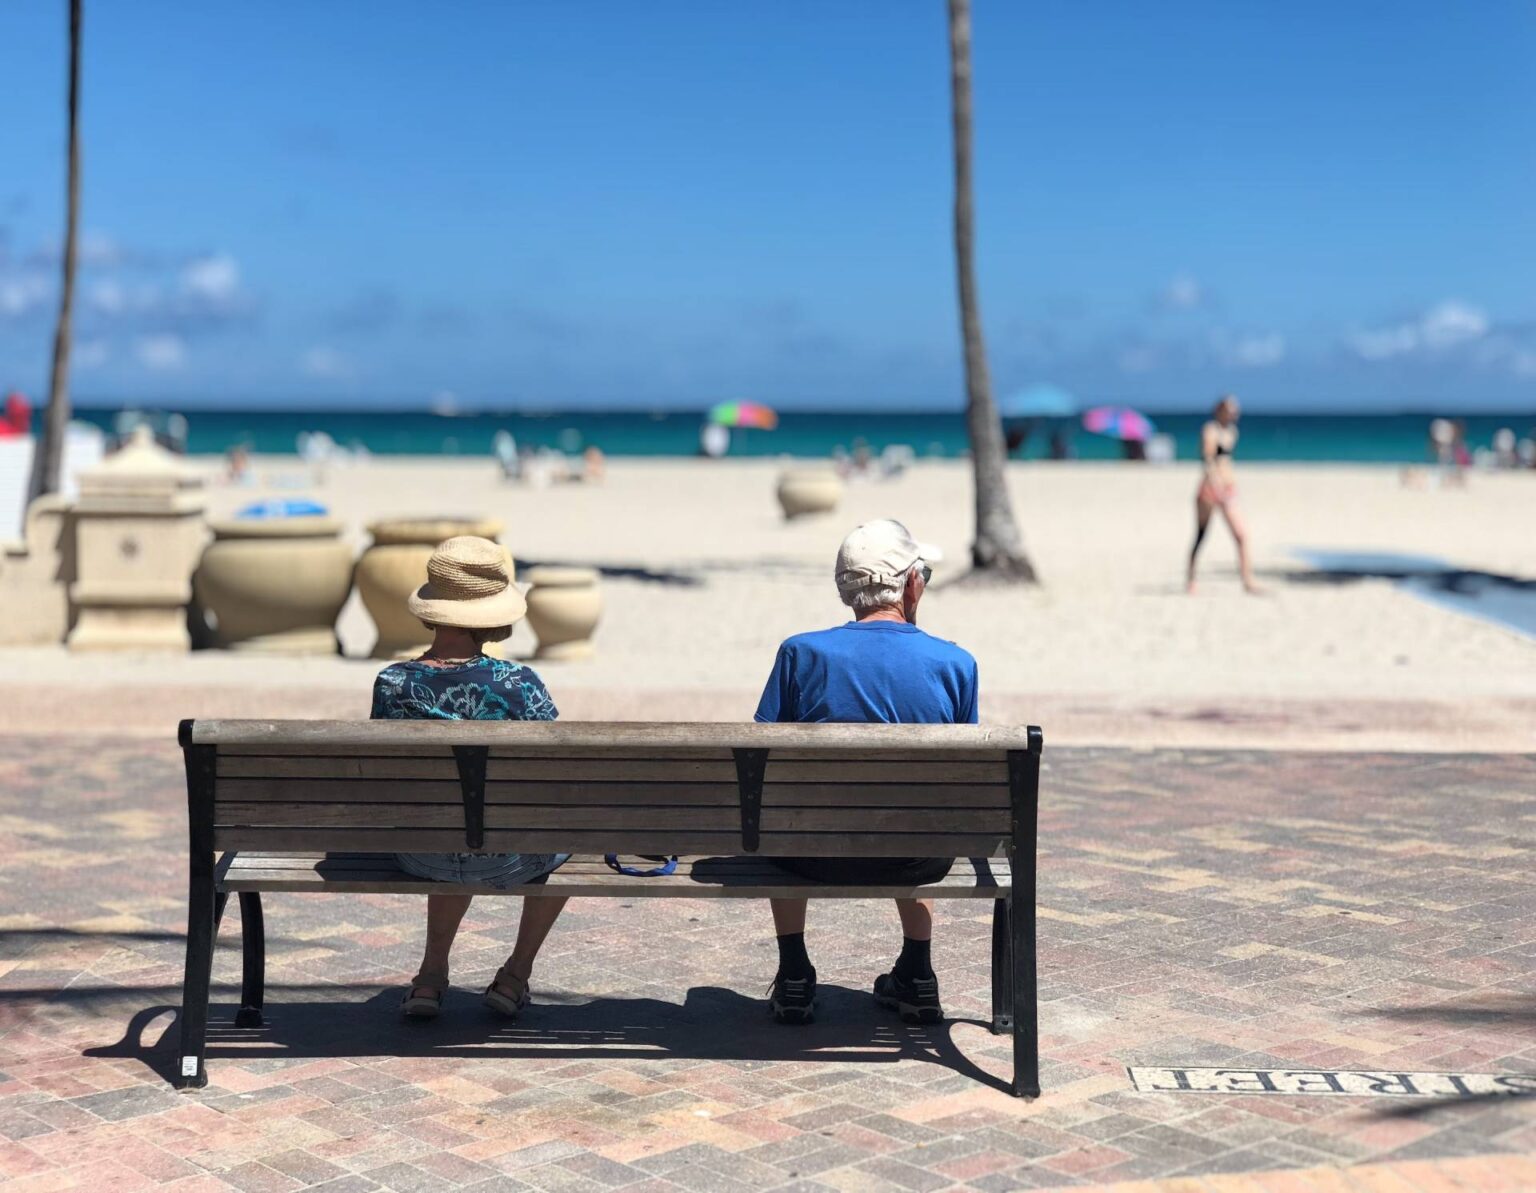 Retirement requires lots of different steps. Here are some very helpful tips to help make the transition to retirement as easy as possible.